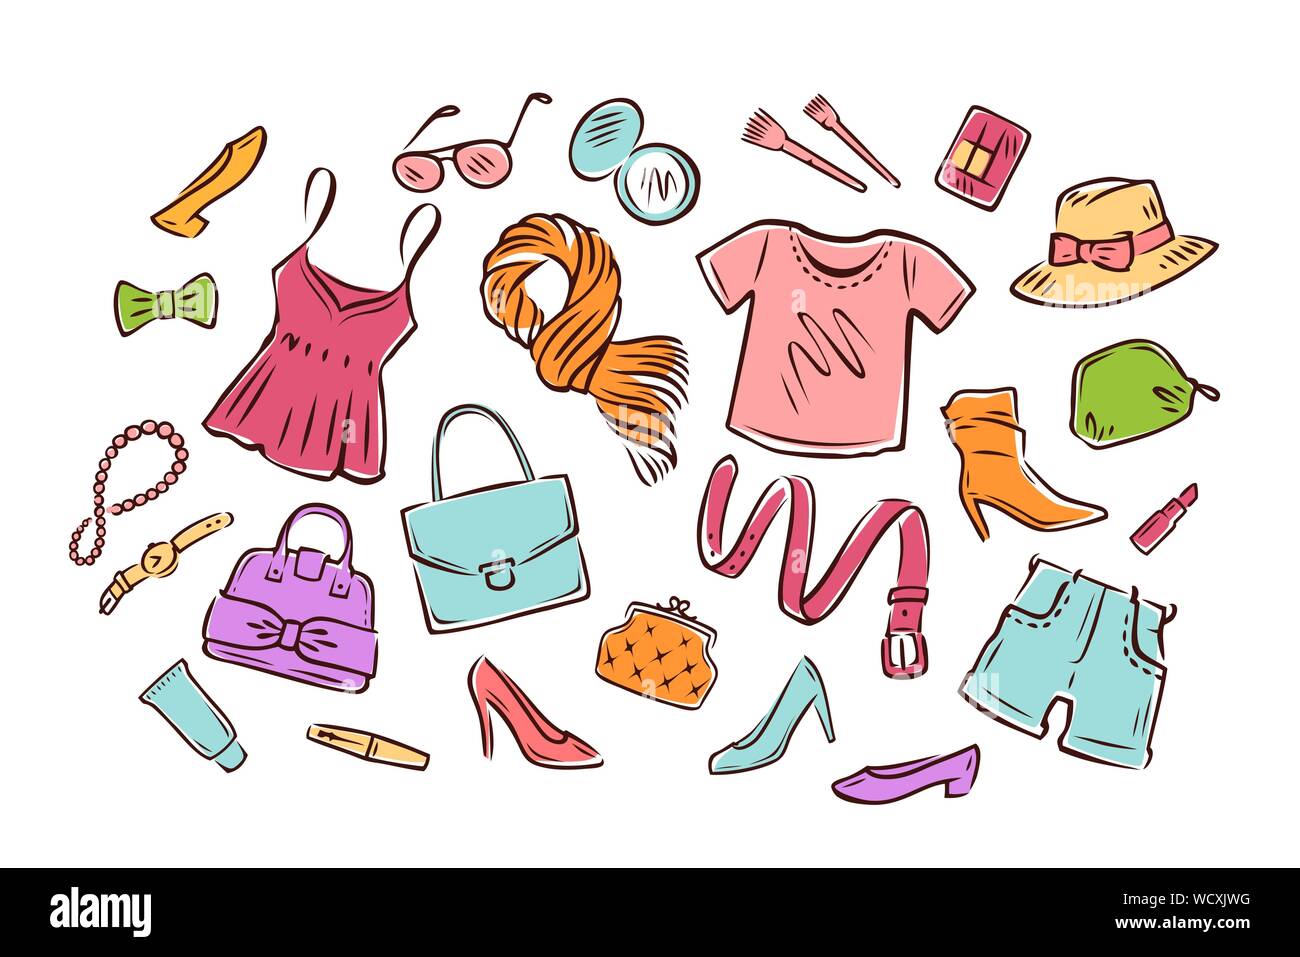 Women's clothing collection. Fashion, shopping vector illustration Stock Vector